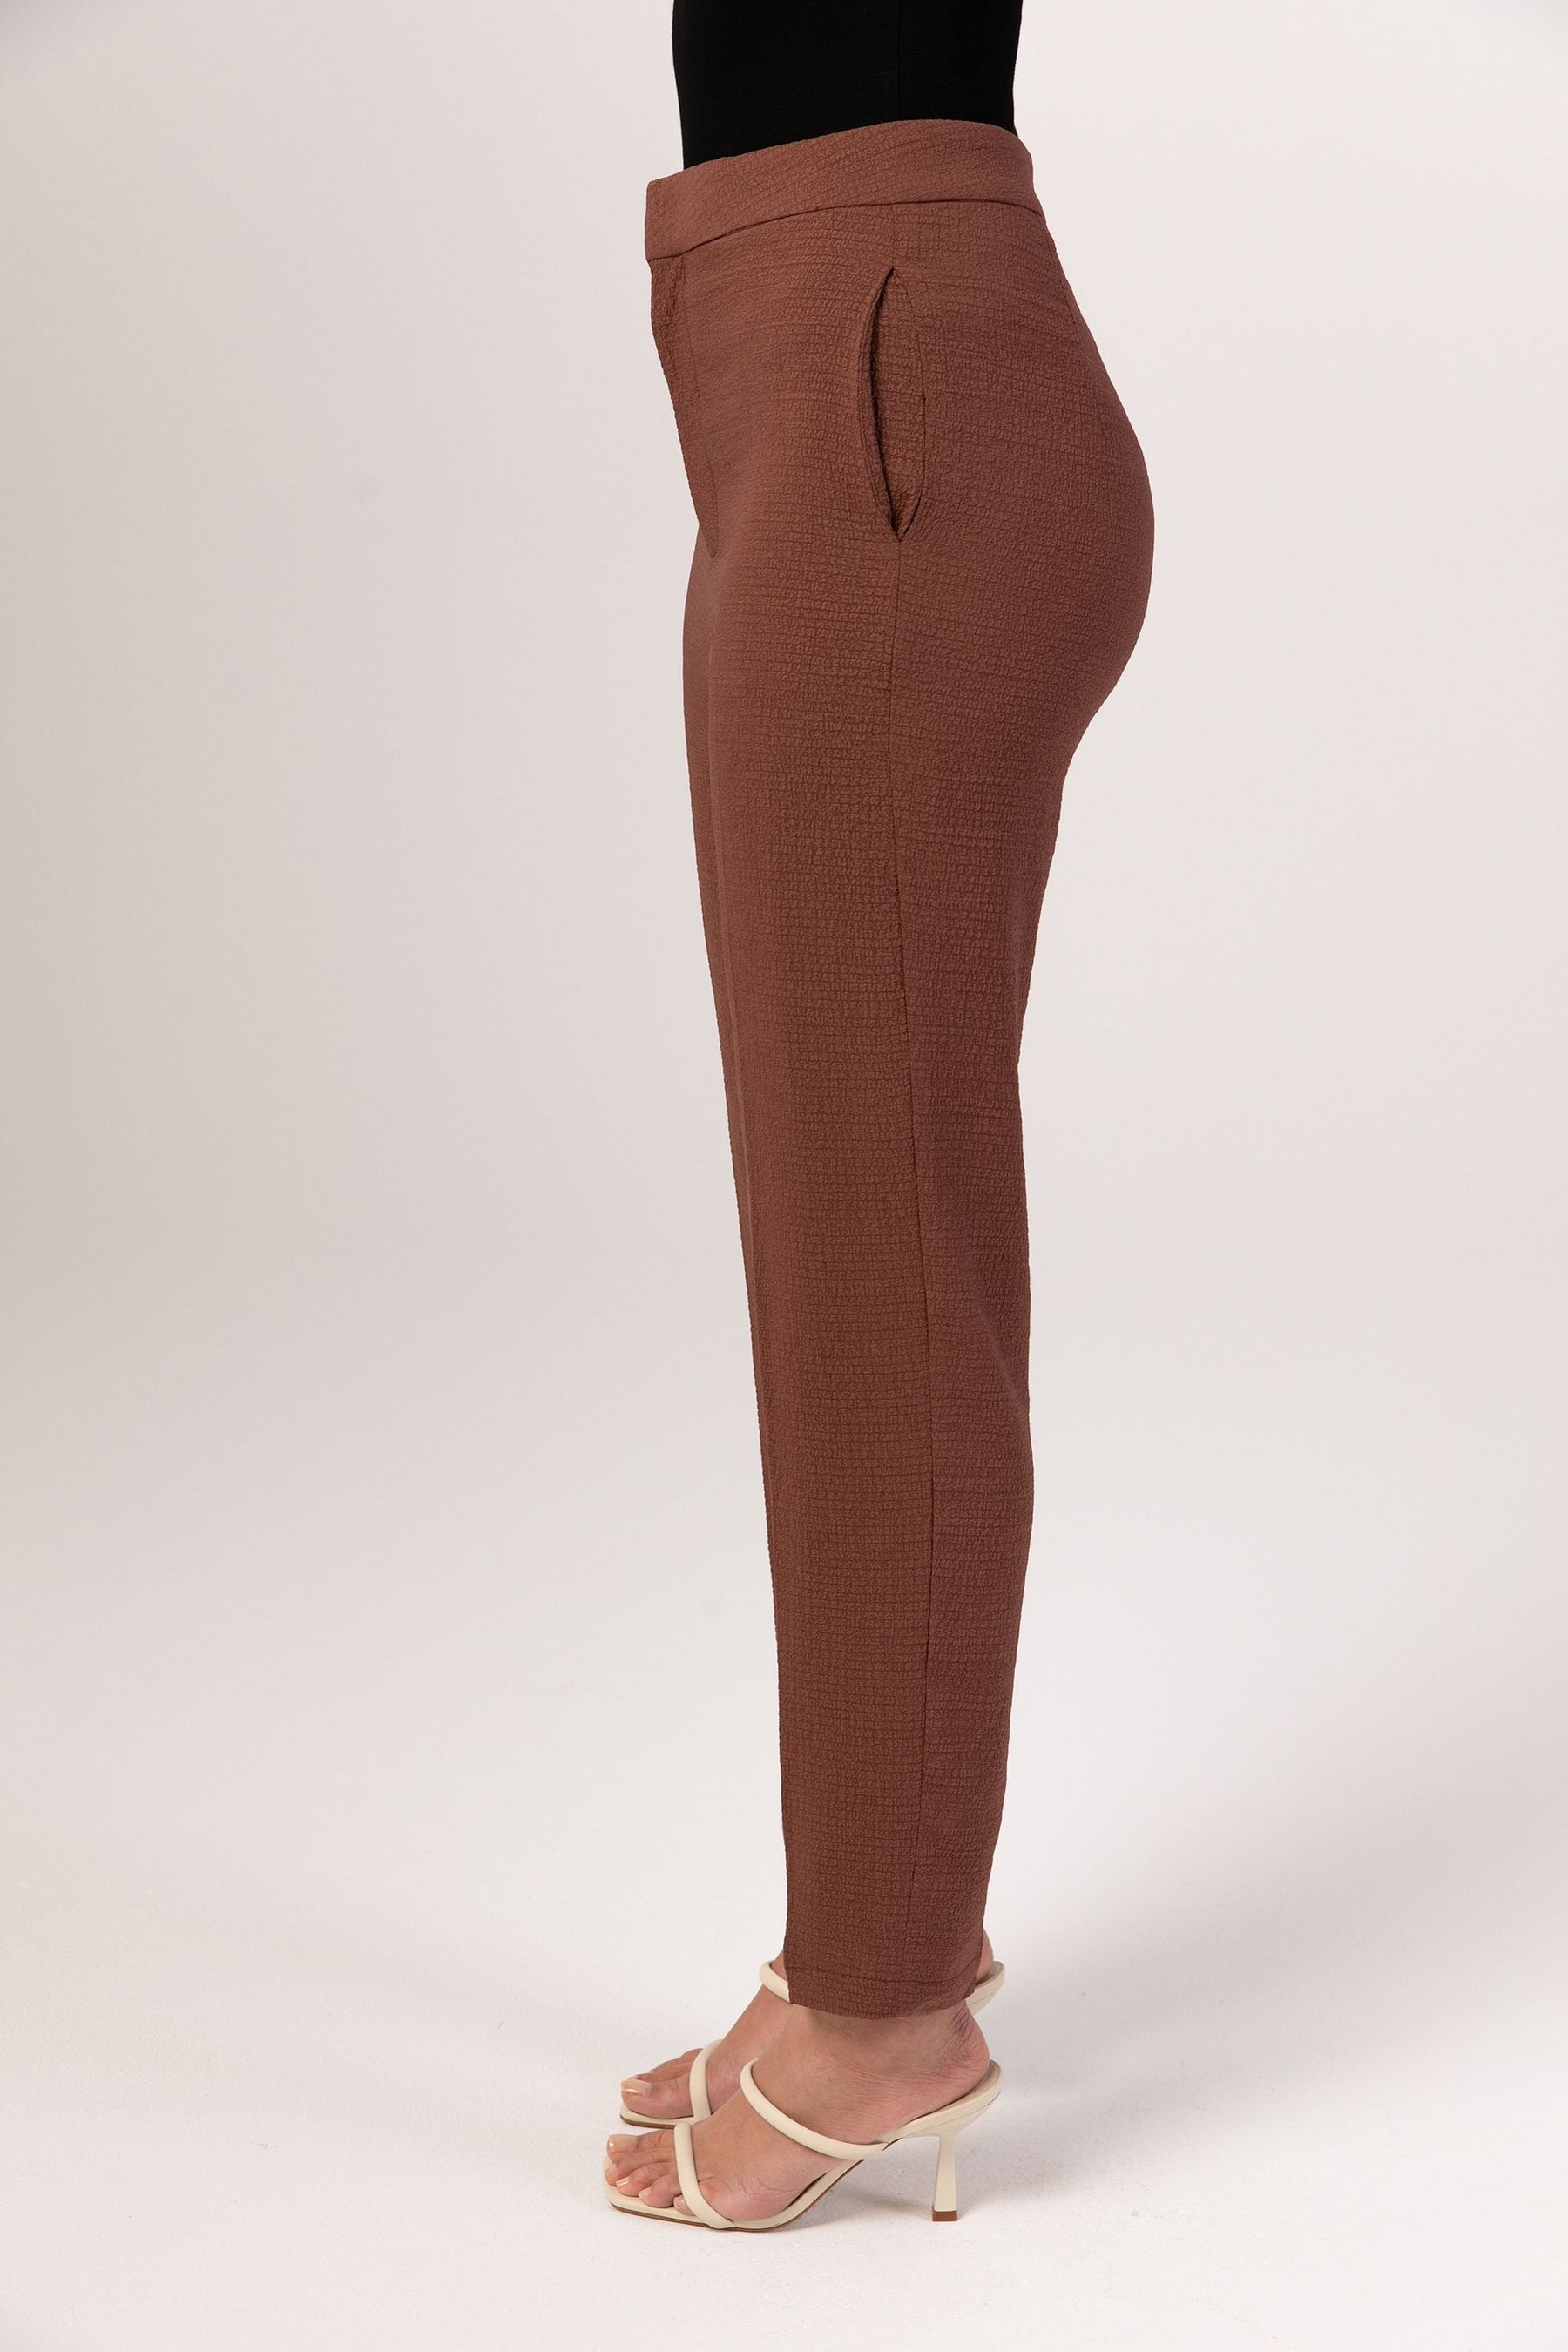 Brown Textured Straight Leg Trousers Veiled Collection 